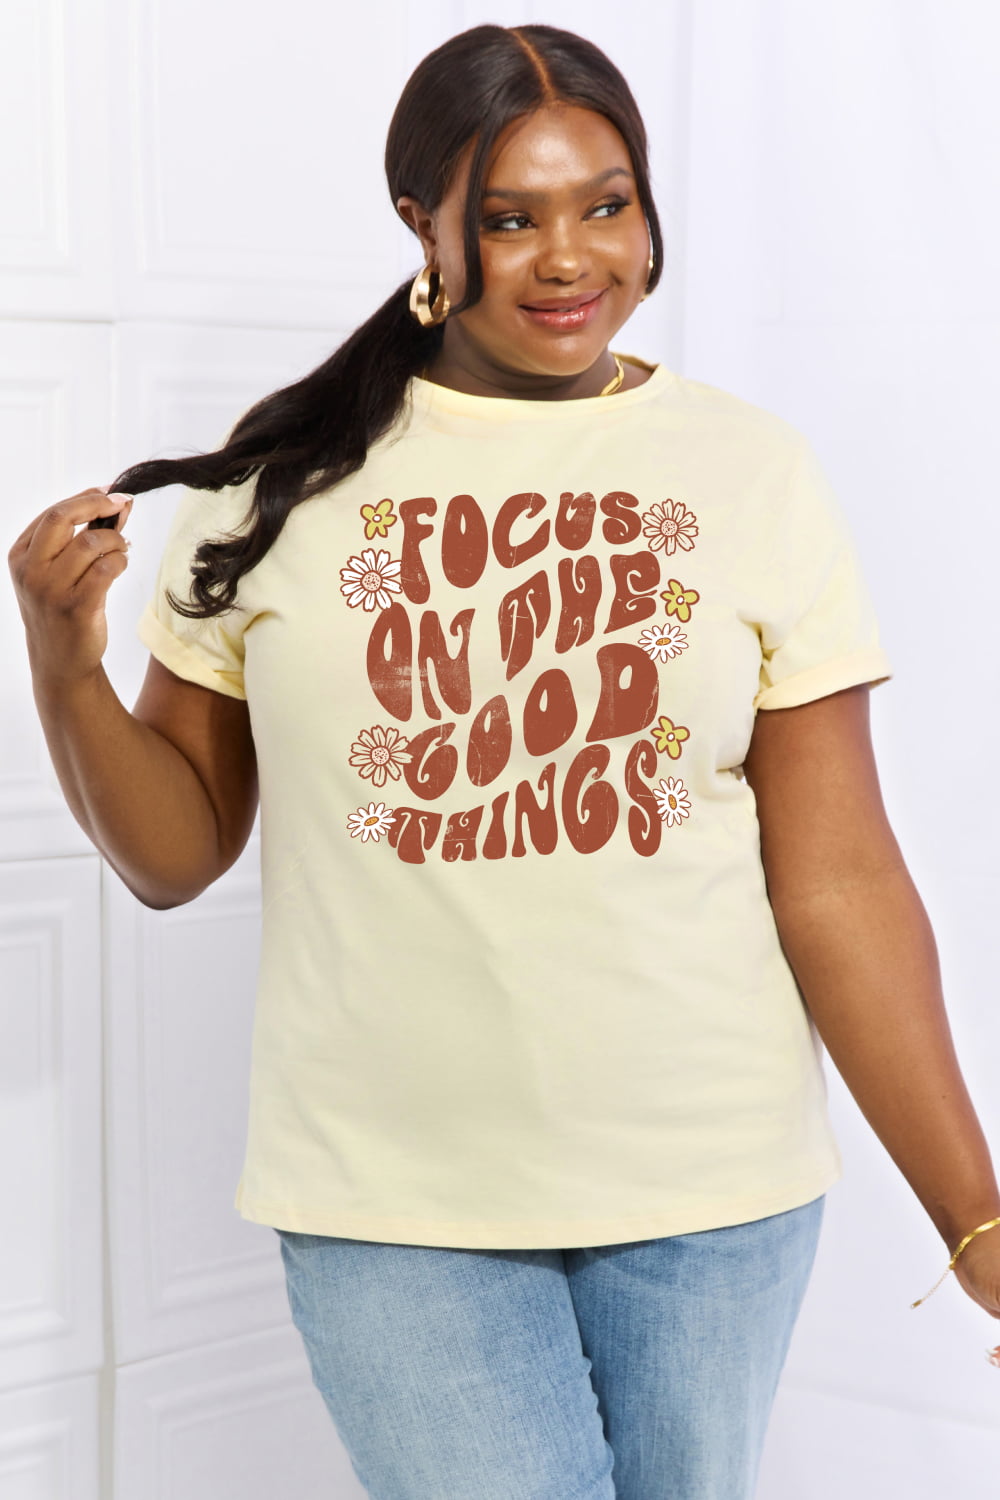 FOCUS ON THE GOOD THINGS Graphic Cotton Tee